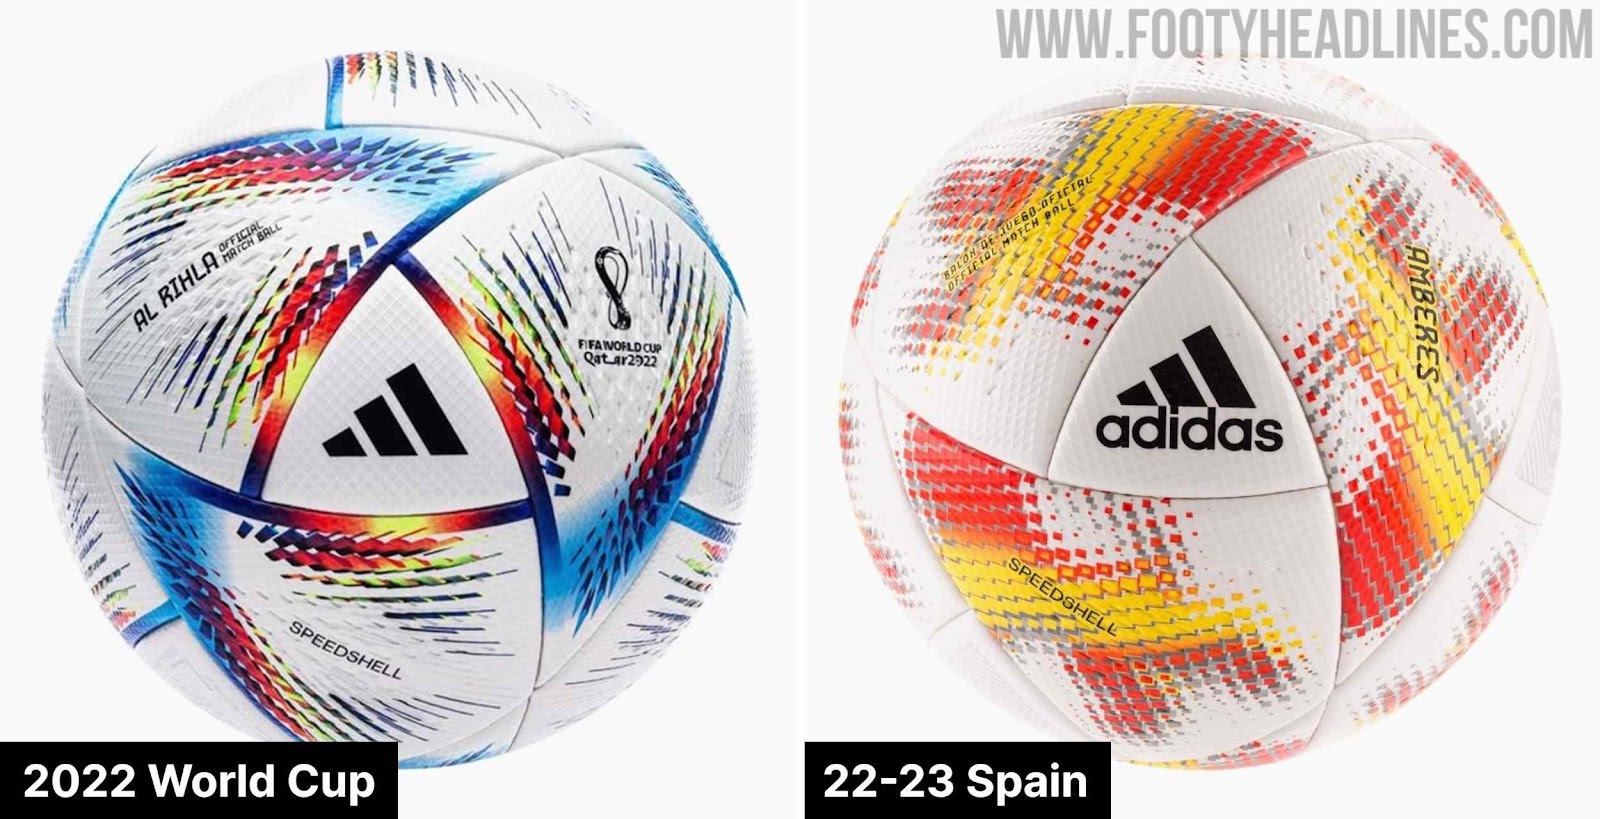 celos Cría Touhou Based on 2022 World Cup Ball: Adidas Spain Copa del Rey & Super Cup 22-23  Ball Released - Footy Headlines